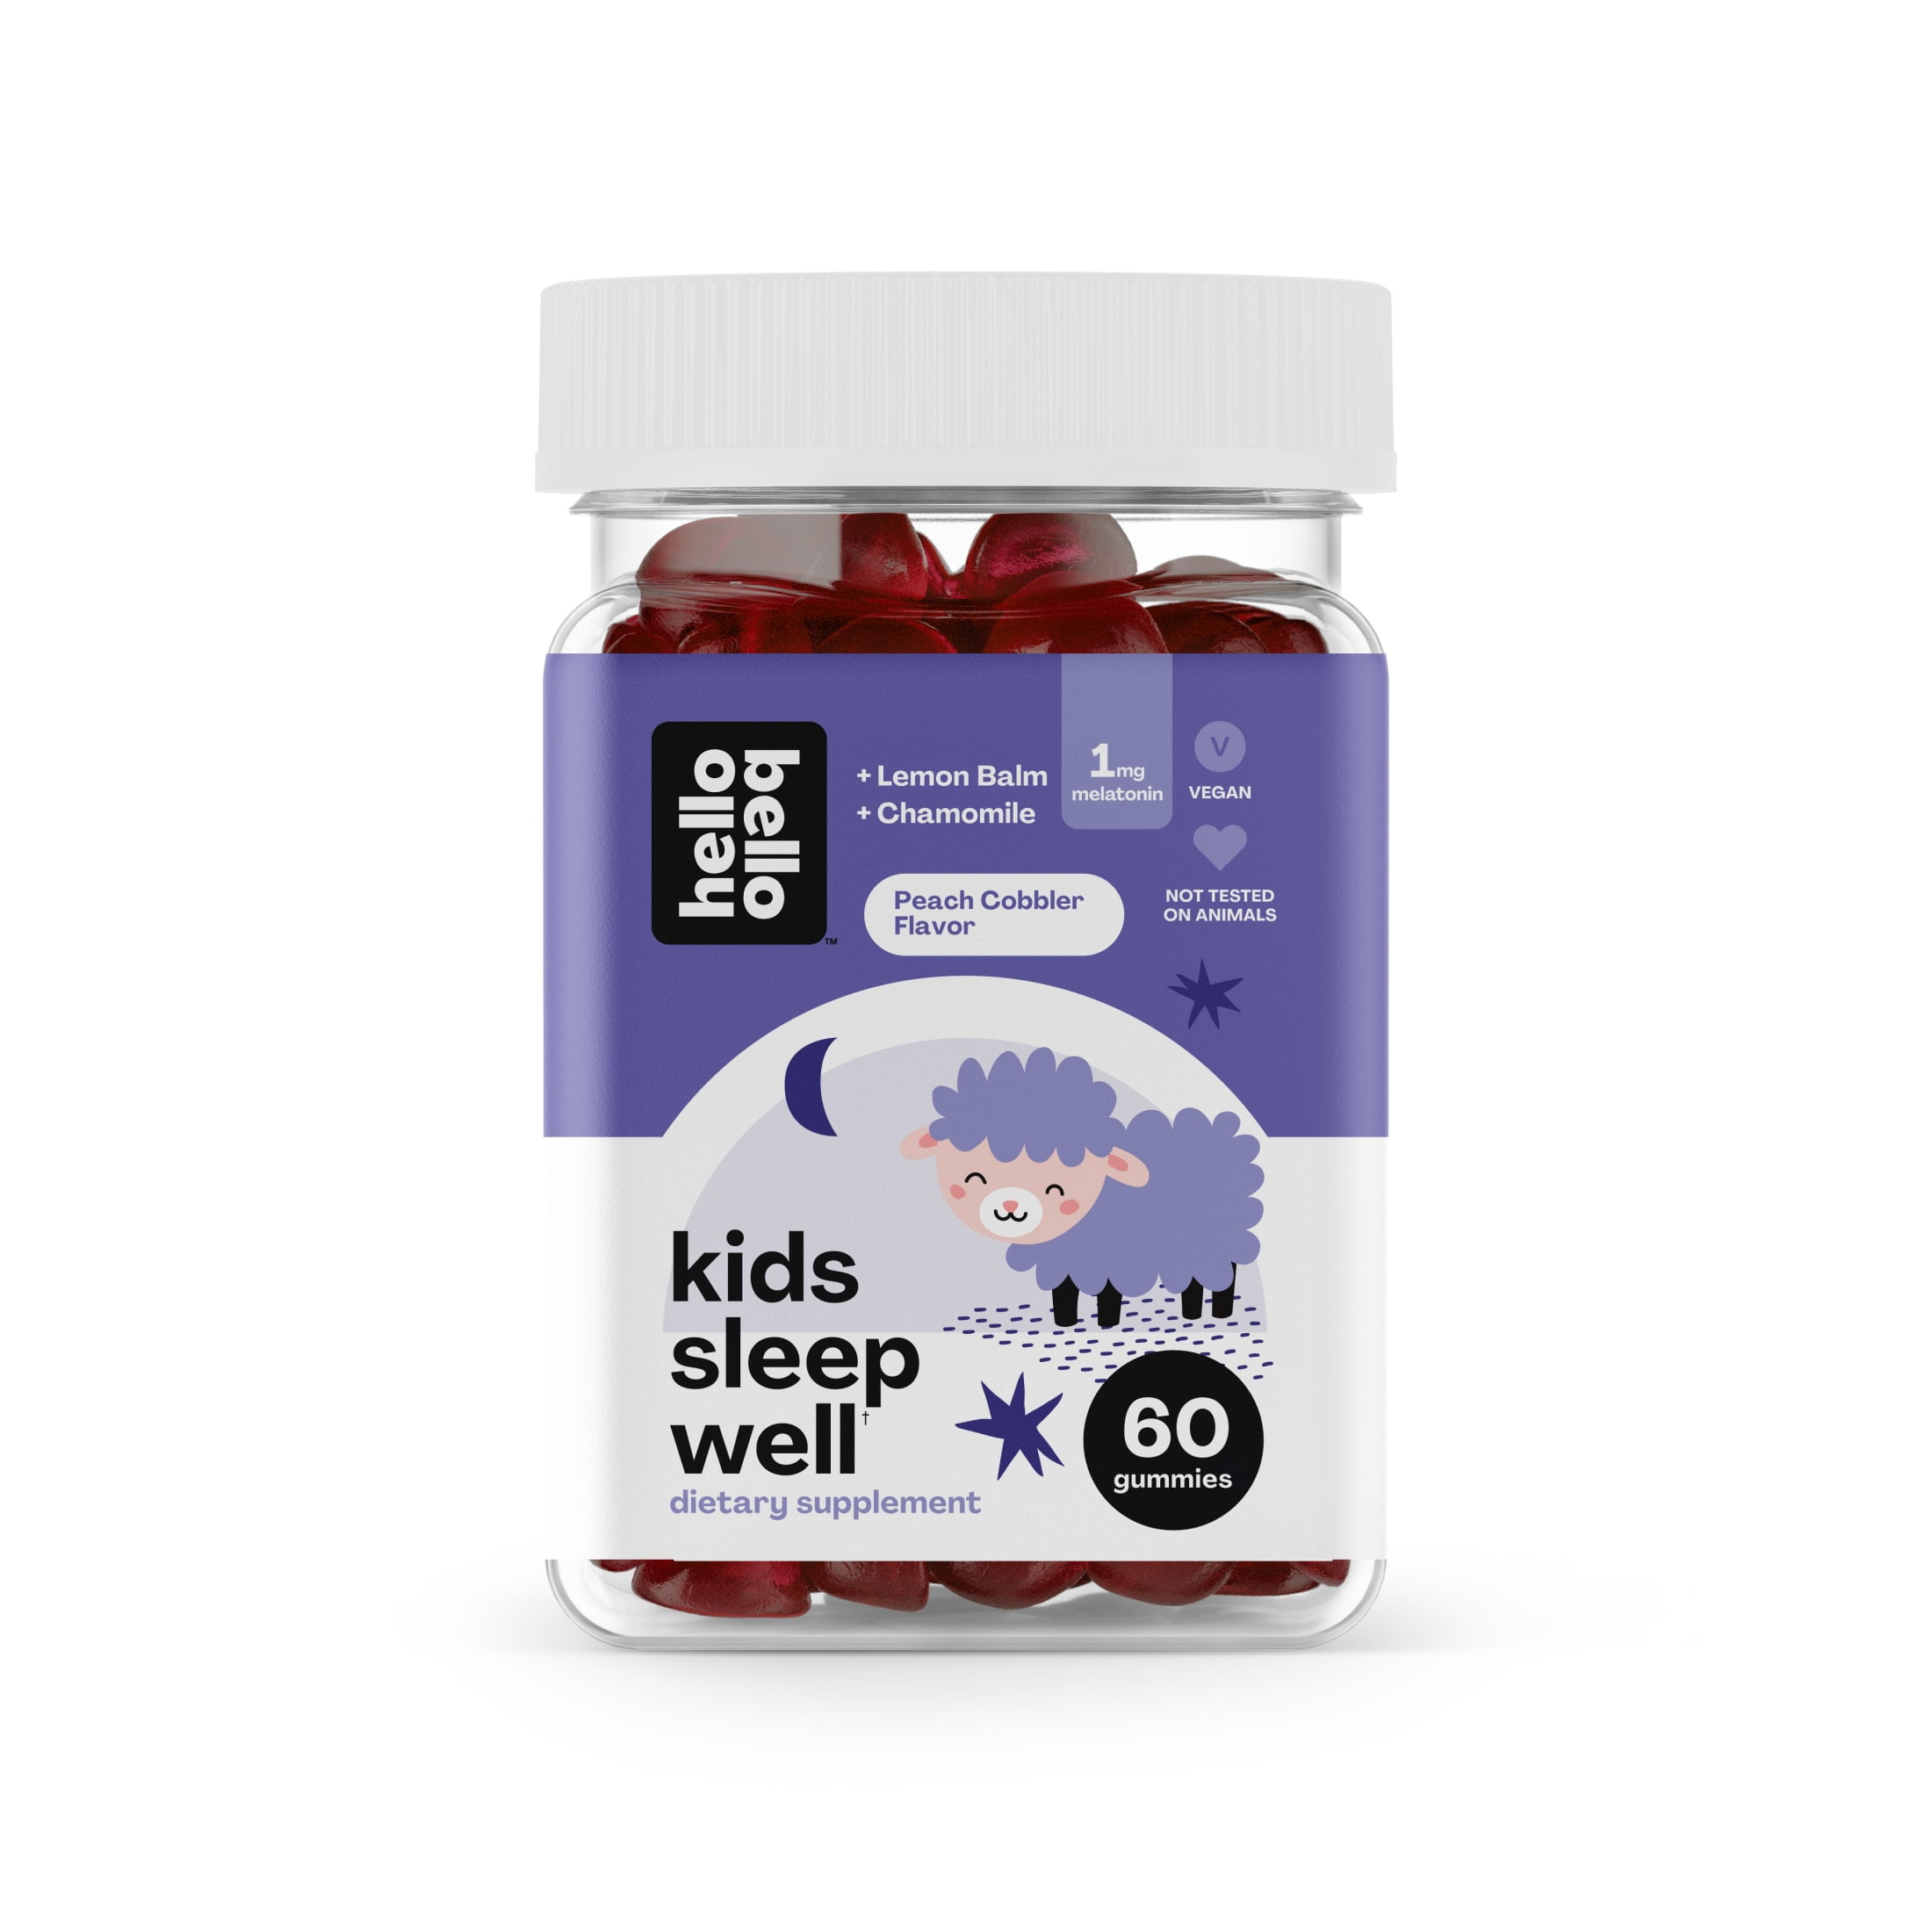 Hello Bello Organic Kid's Sleep Gummy Vitamin I Vegan, Certified Organic and nonGMO Natural Berry Flavor Gummies I Made with Melatonin to Promote Relaxation and Regulate the Sleep Cycle I 60 Count